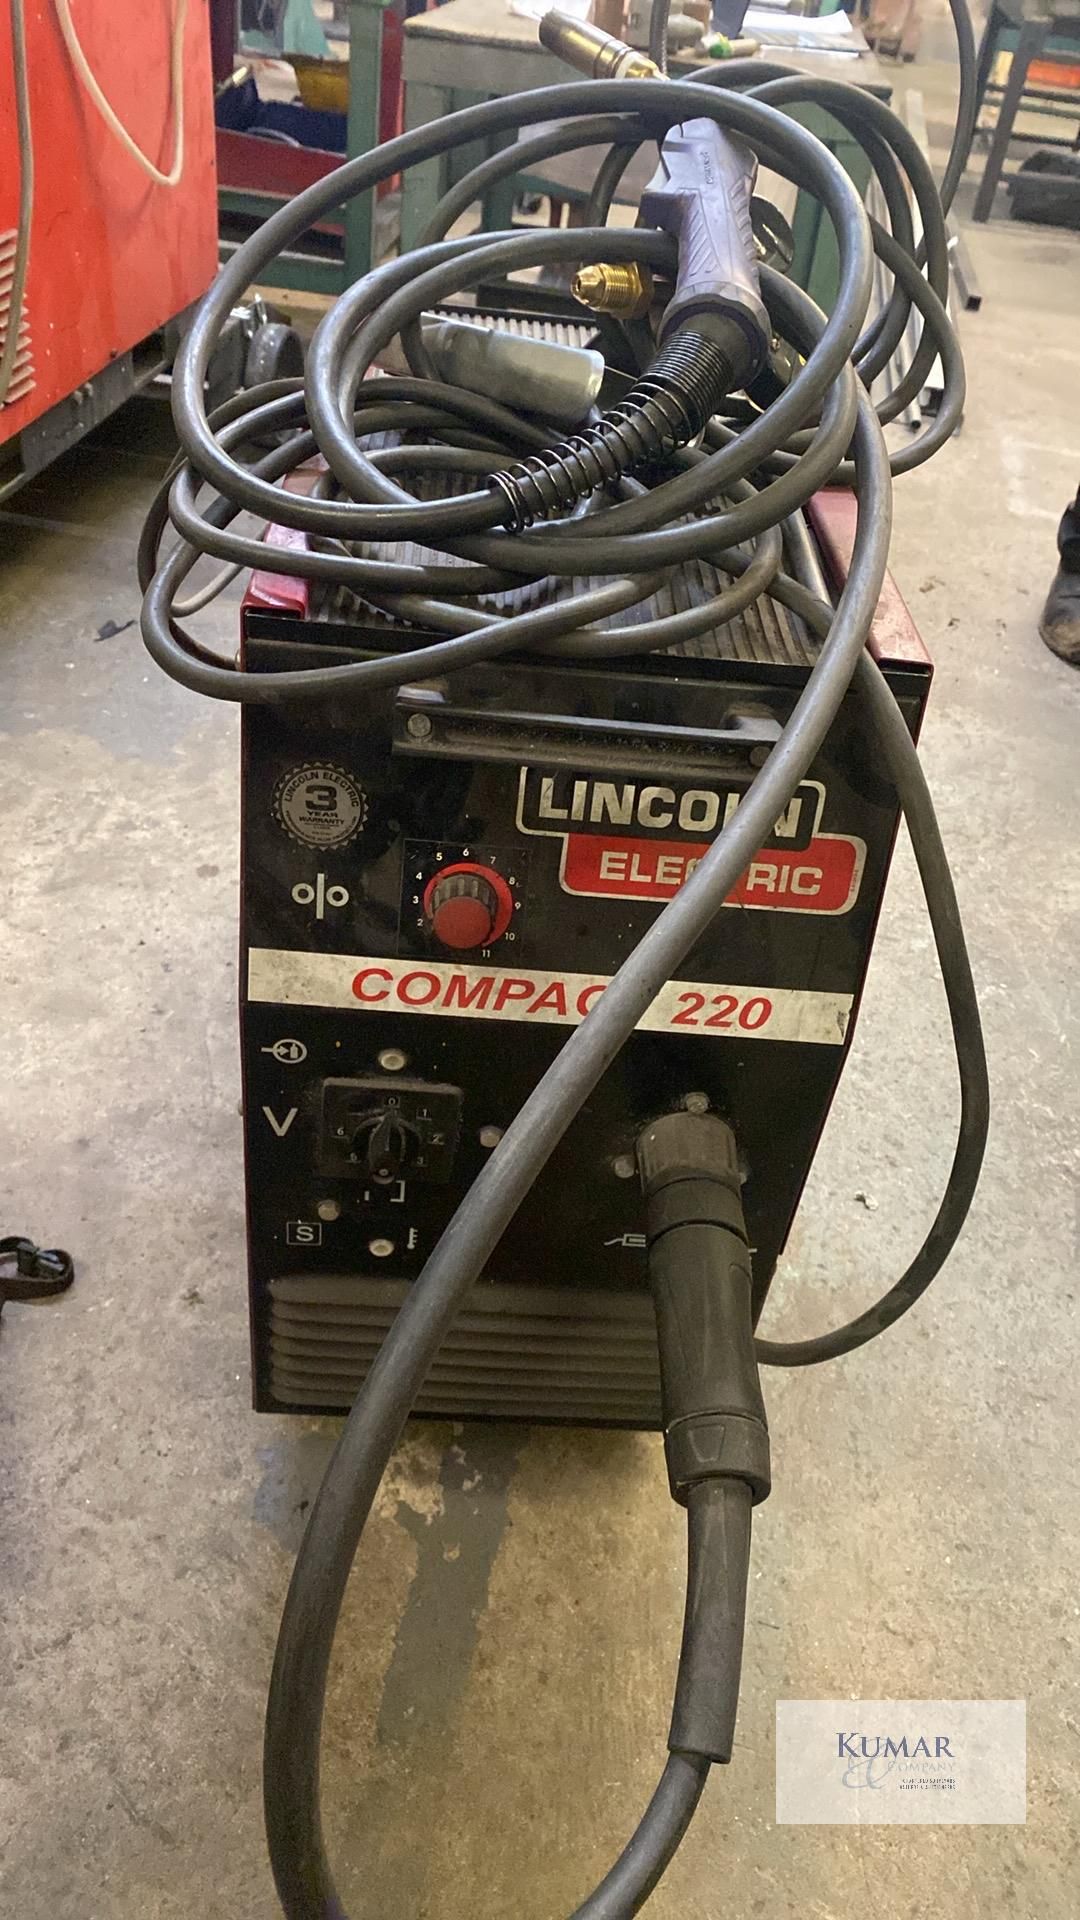 Lincoln Electric Compact 220 Welder  Collection Day – Tuesday 27th February Unit 4 Goscote